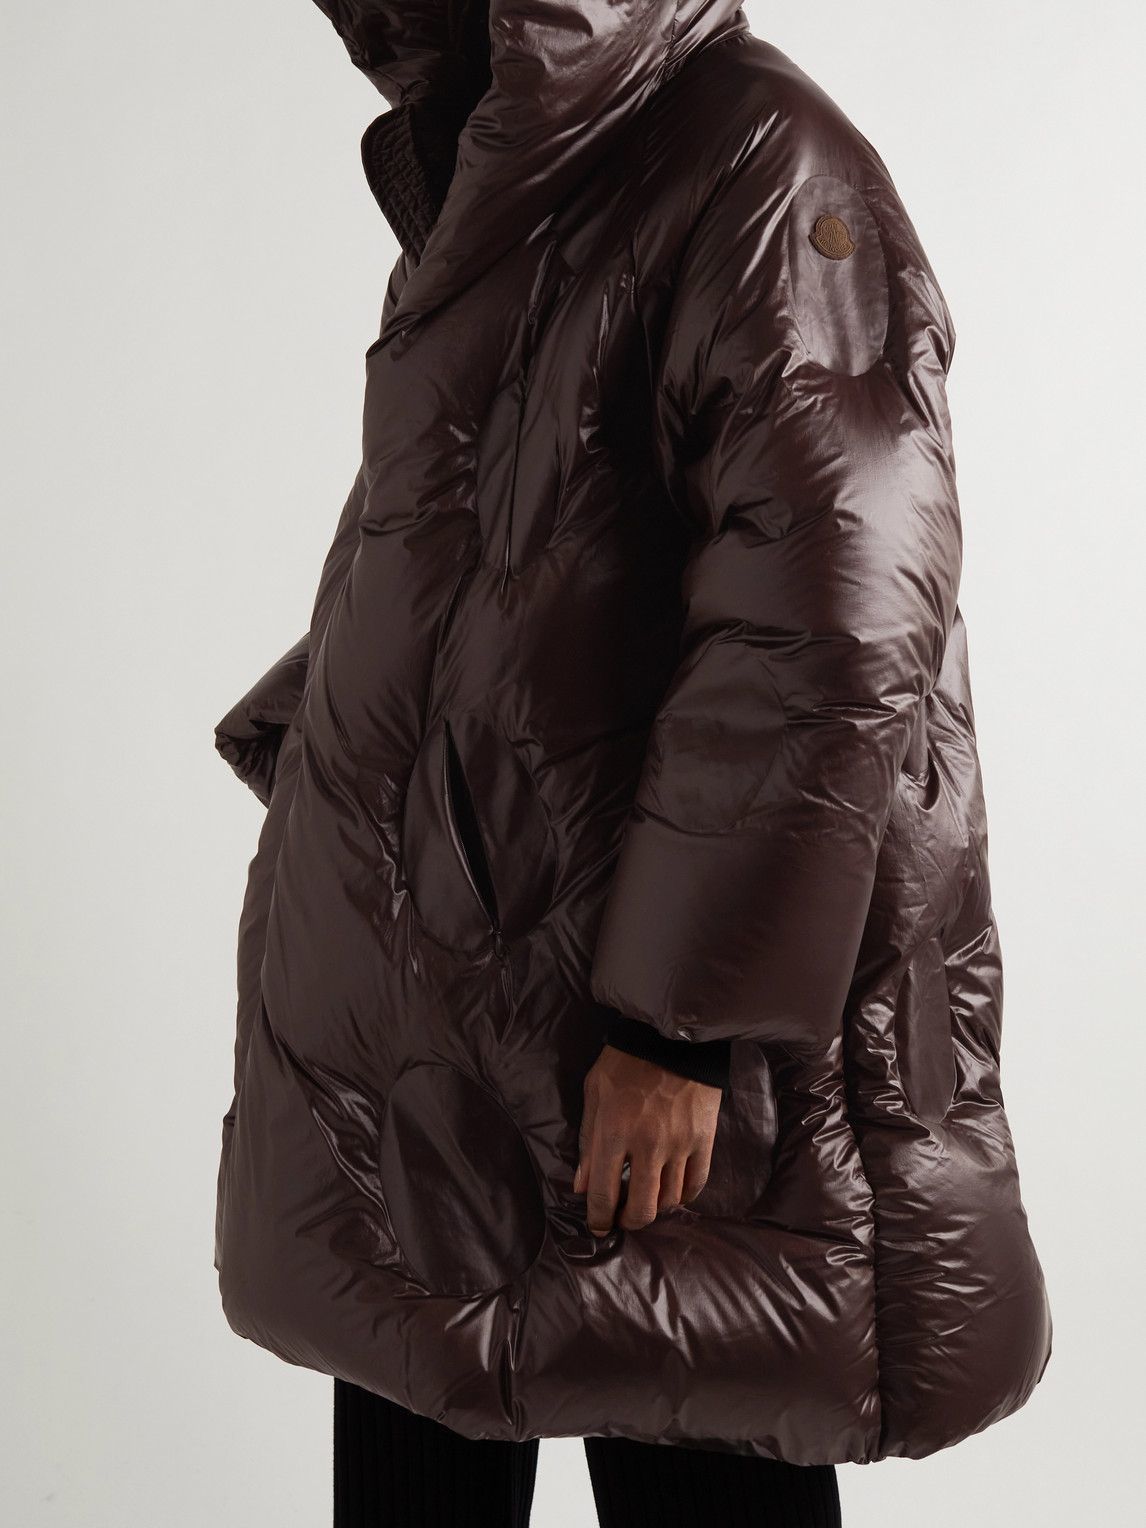 Moncler Genius - Dingyun Zhang Iaphia Oversized Quilted Glossed-Shell ...